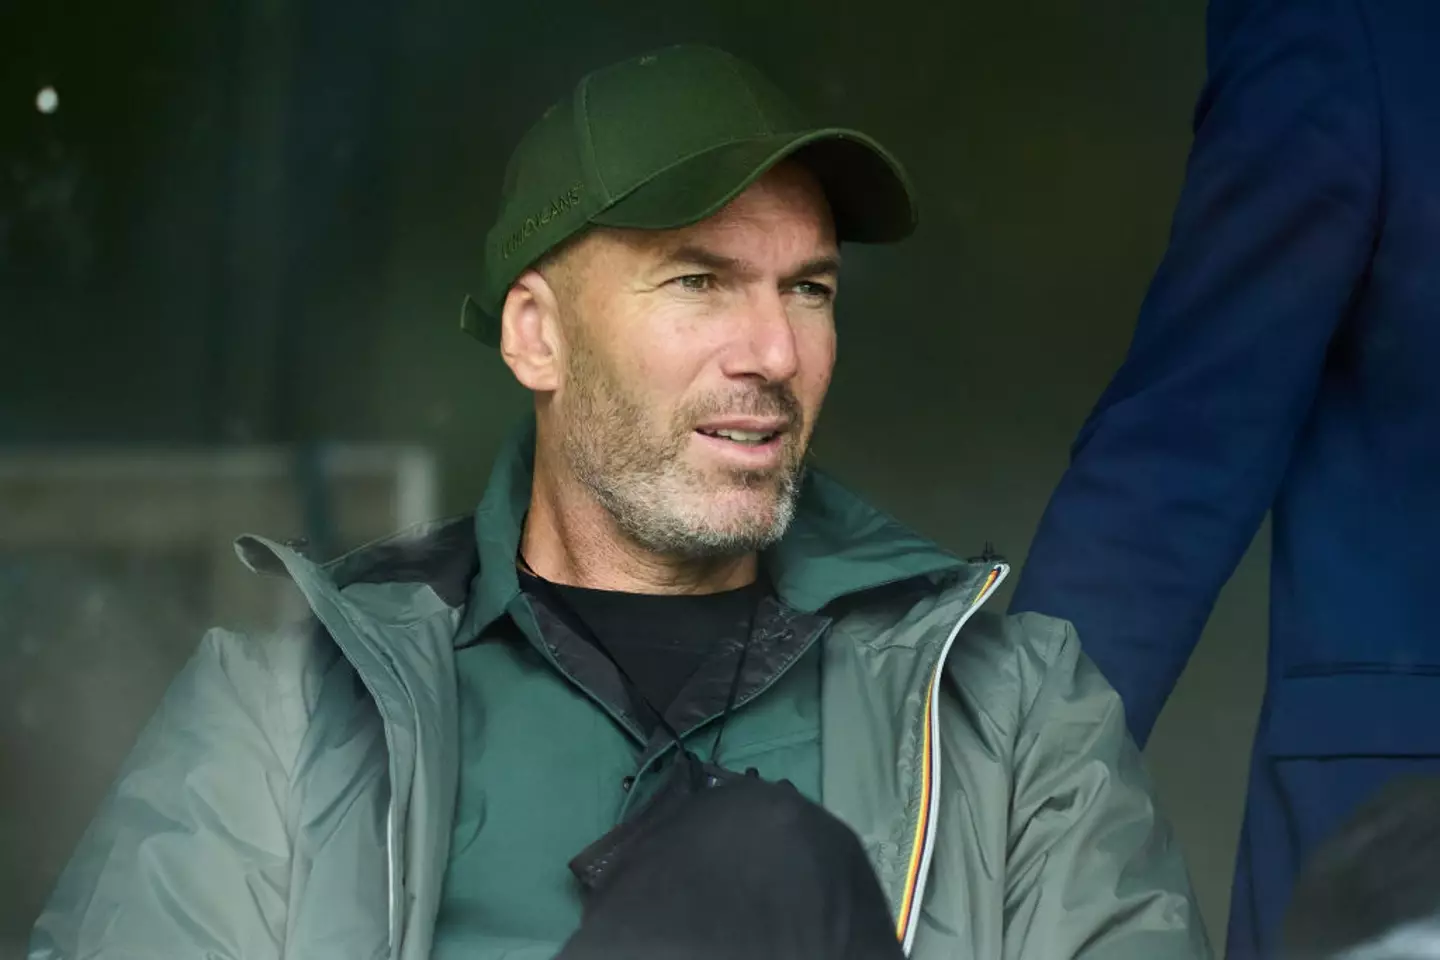 Zidane has been without a role since 2021 (Image: Getty)